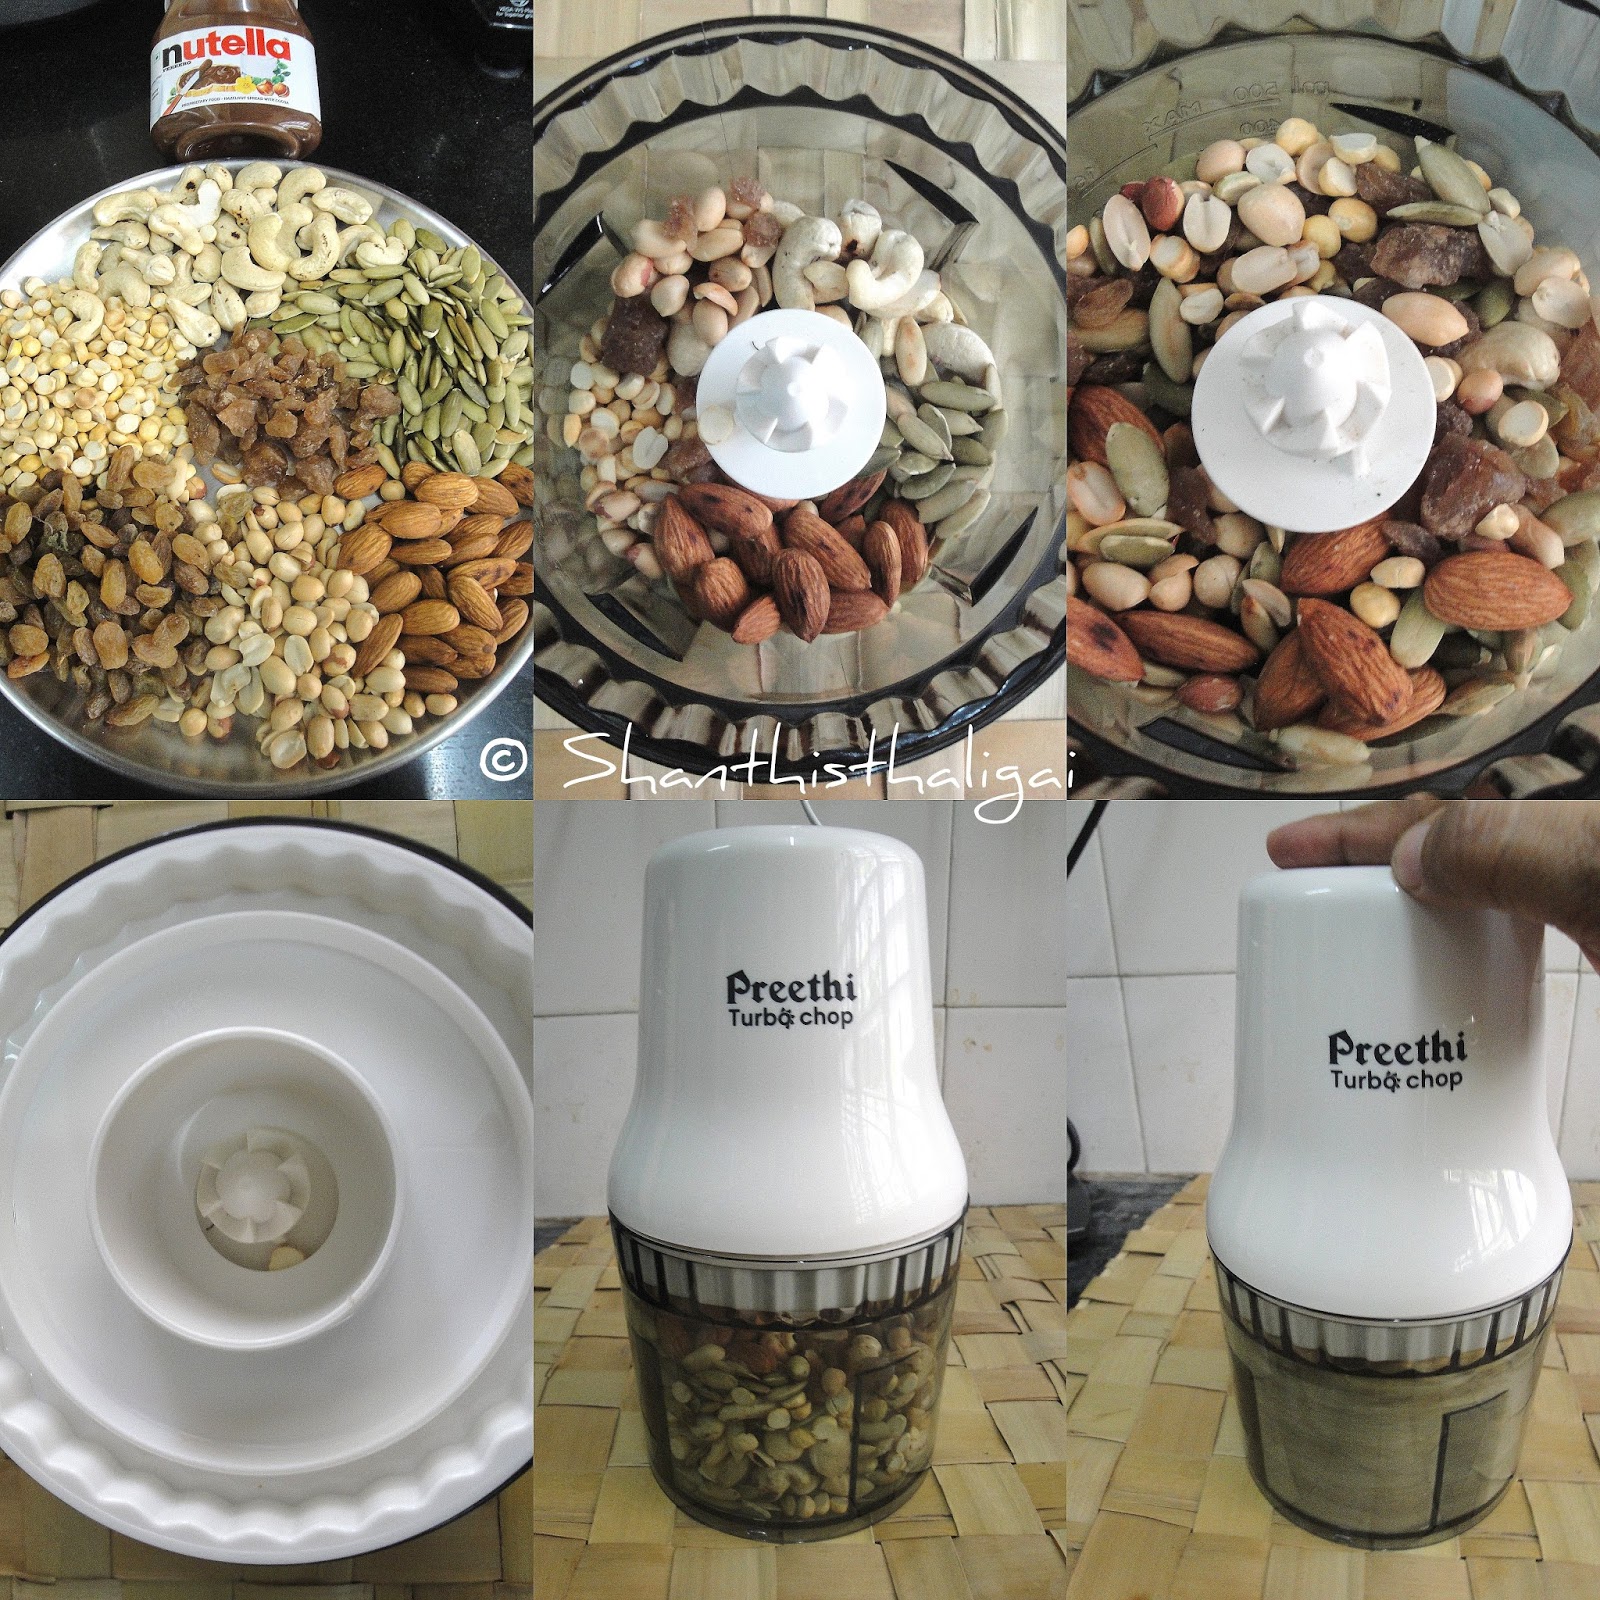 pumpkin seeds-and-nuts-ladoo, How-to-make-protein-ladoo,How-to-make-pumpkin-seeds-ladoo